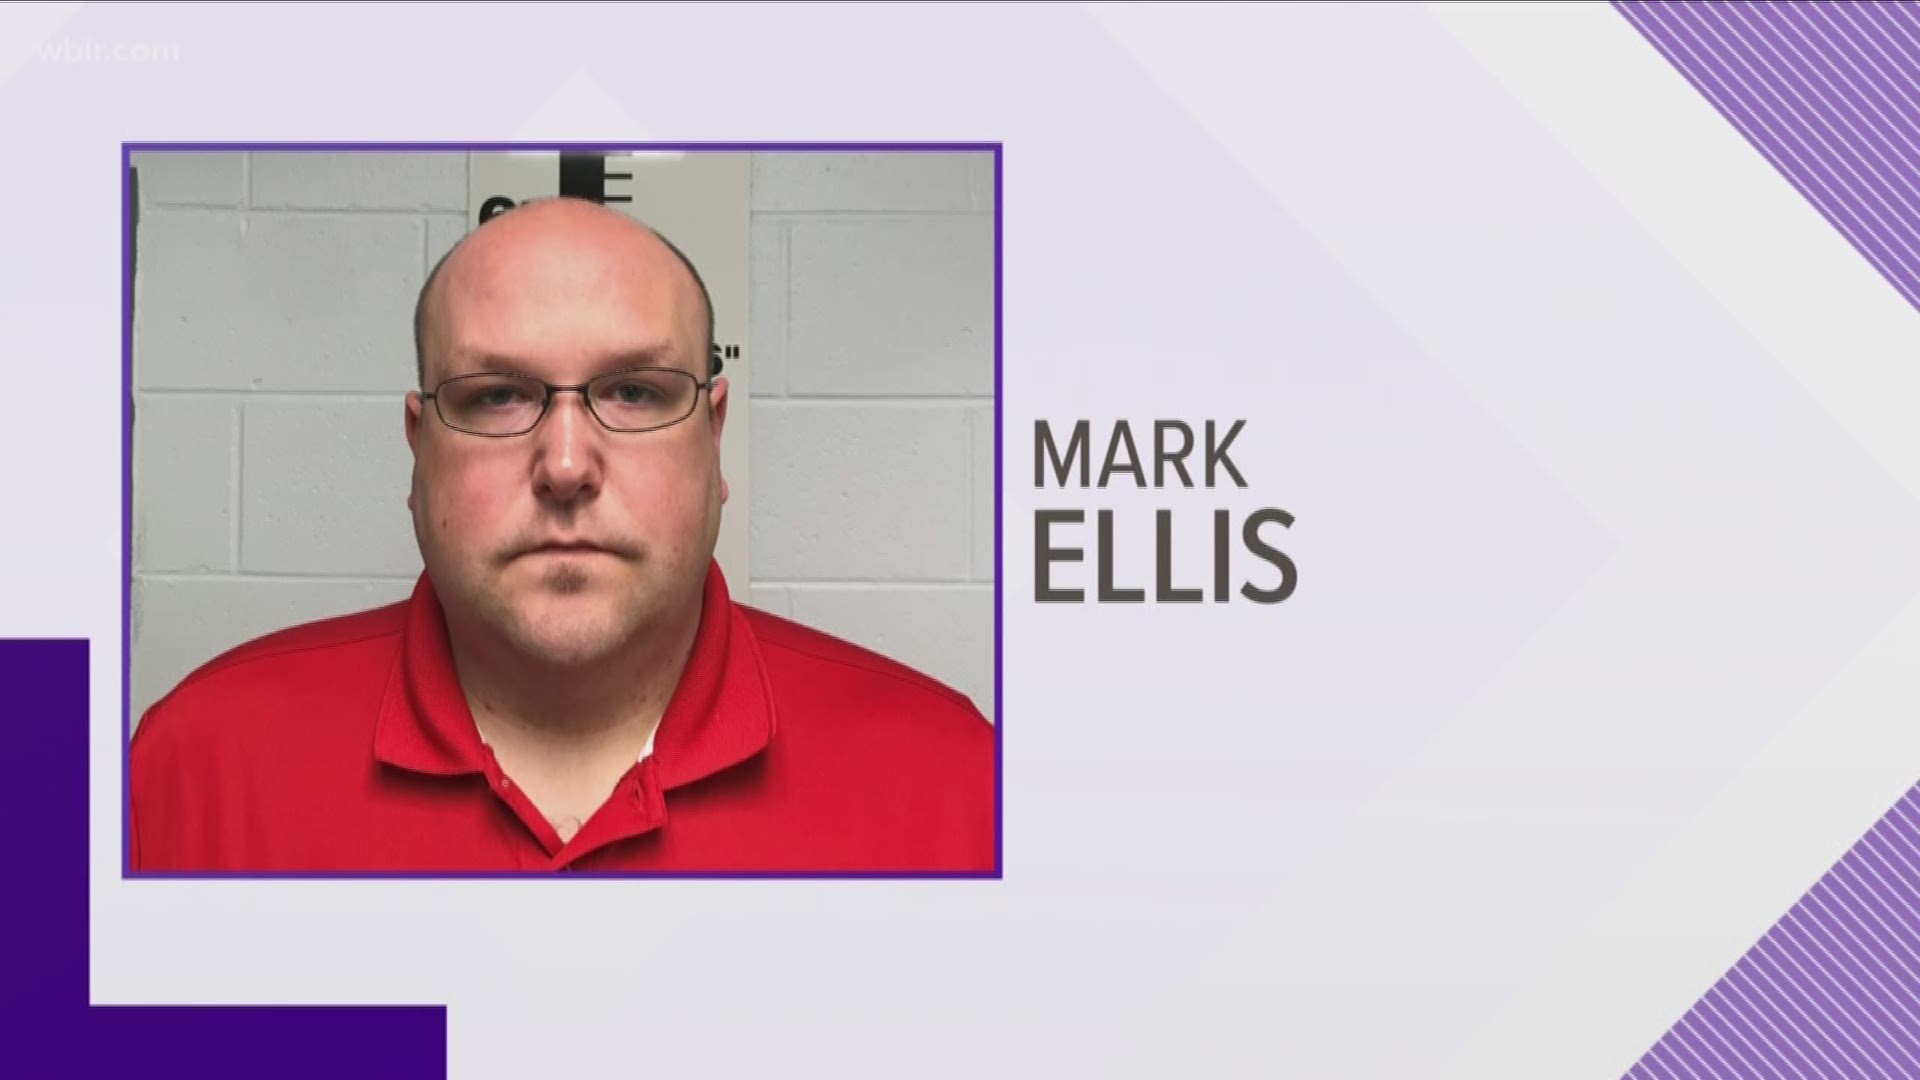 Investigators said Mark Ellis turned himself in Monday after being indicted on charges of assault on an inmate.